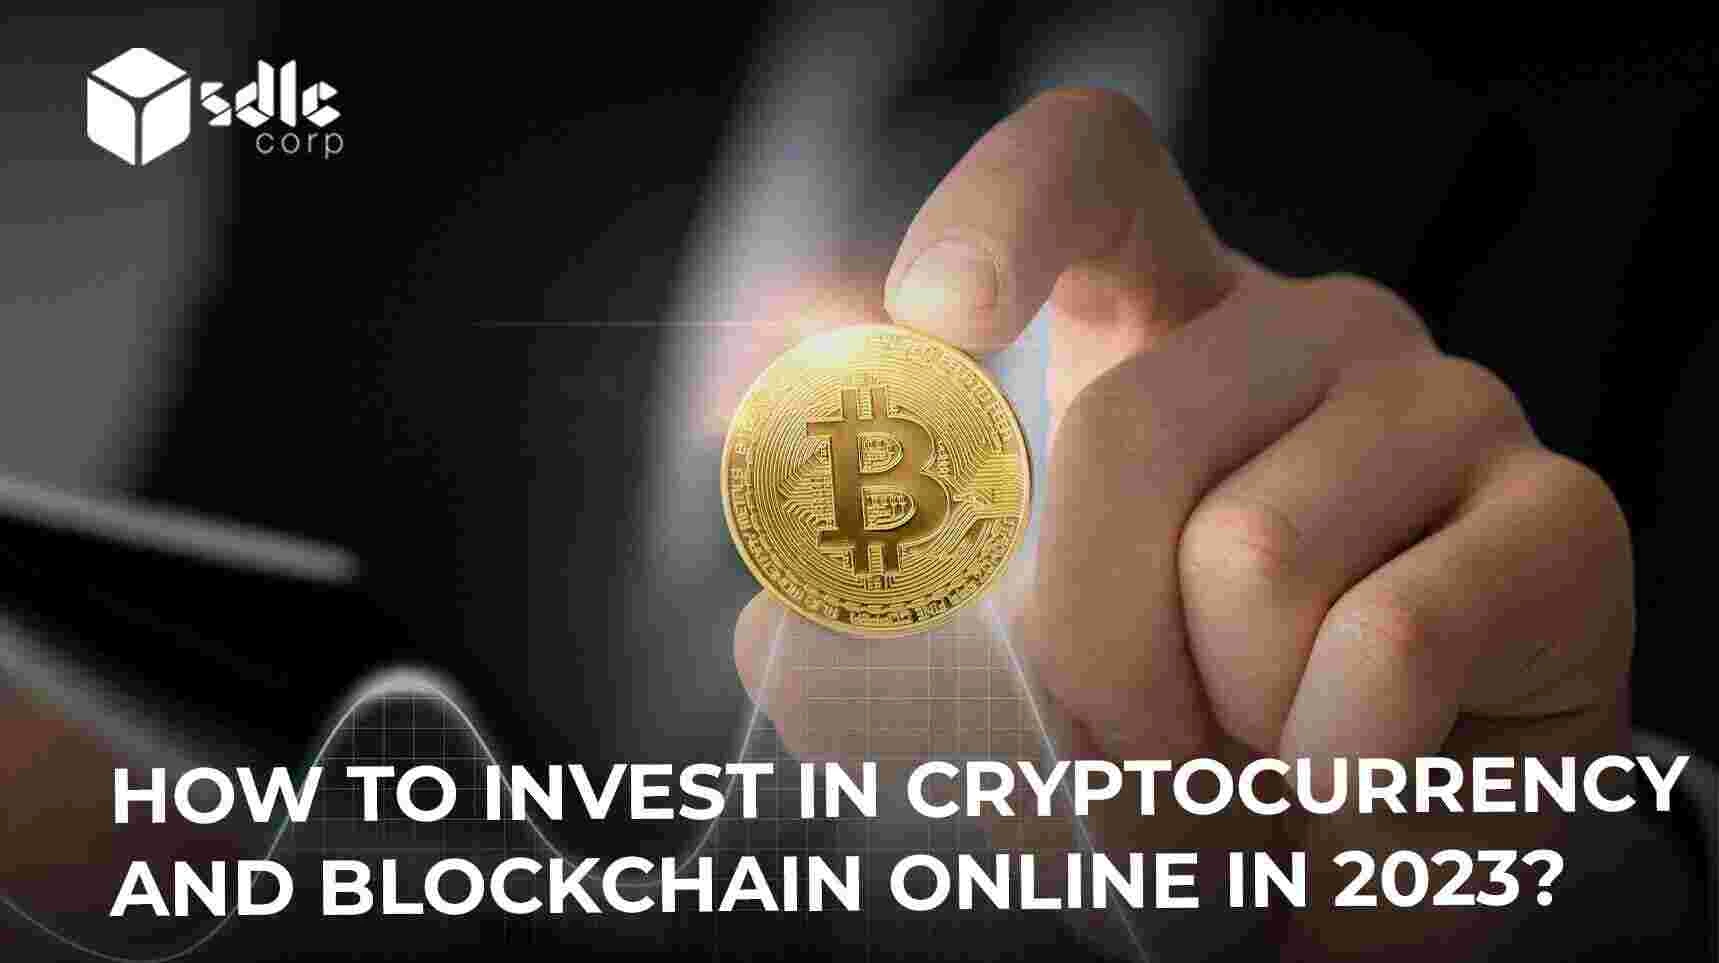 How to Invest in Cryptocurrency and Blockchain Online in 2023